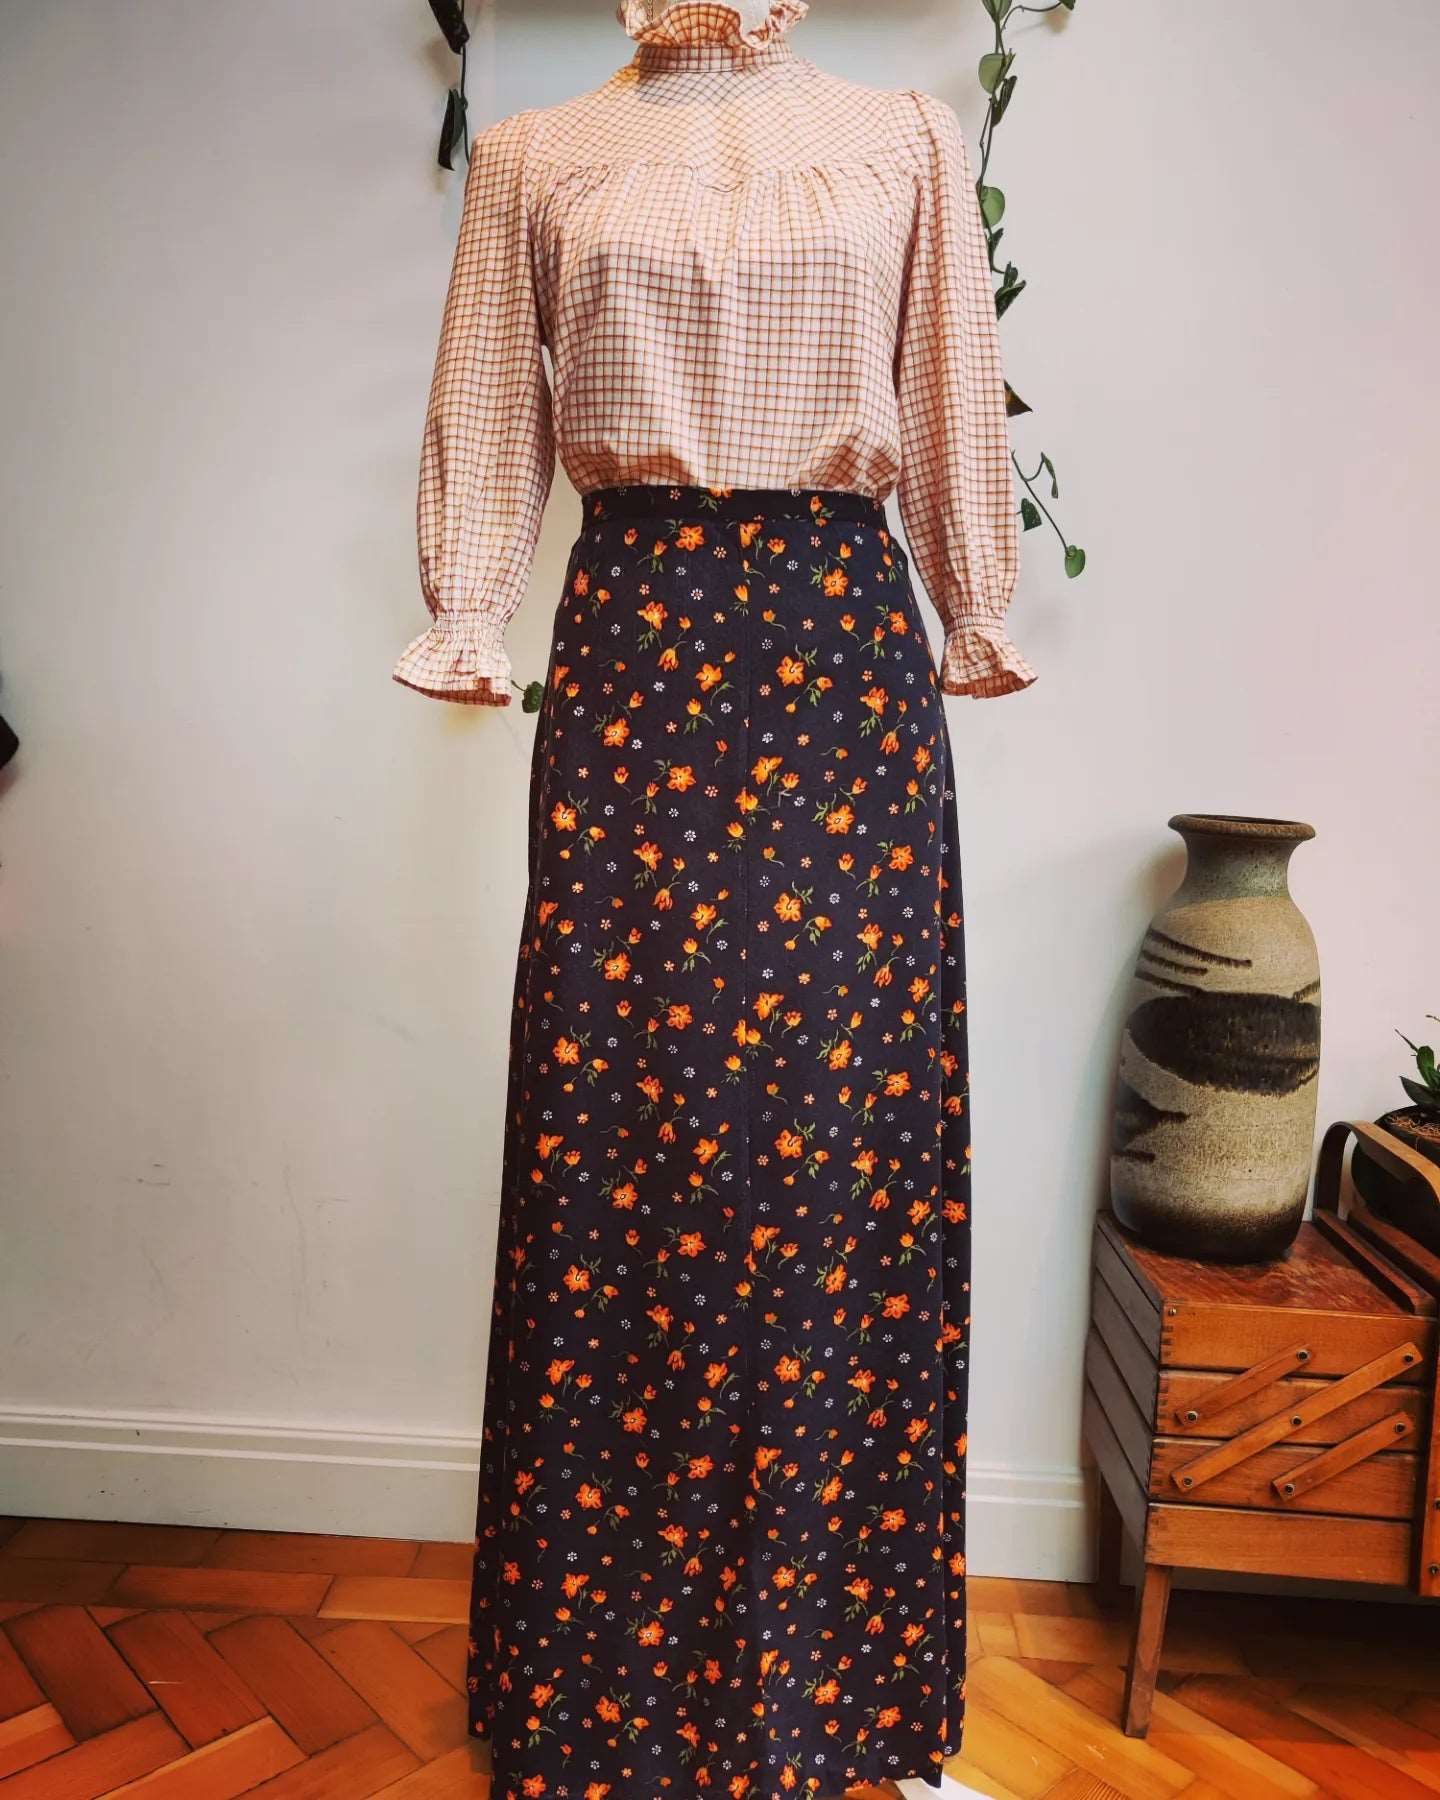 Stunning floral 70s maxi skirt. Size 6-8.